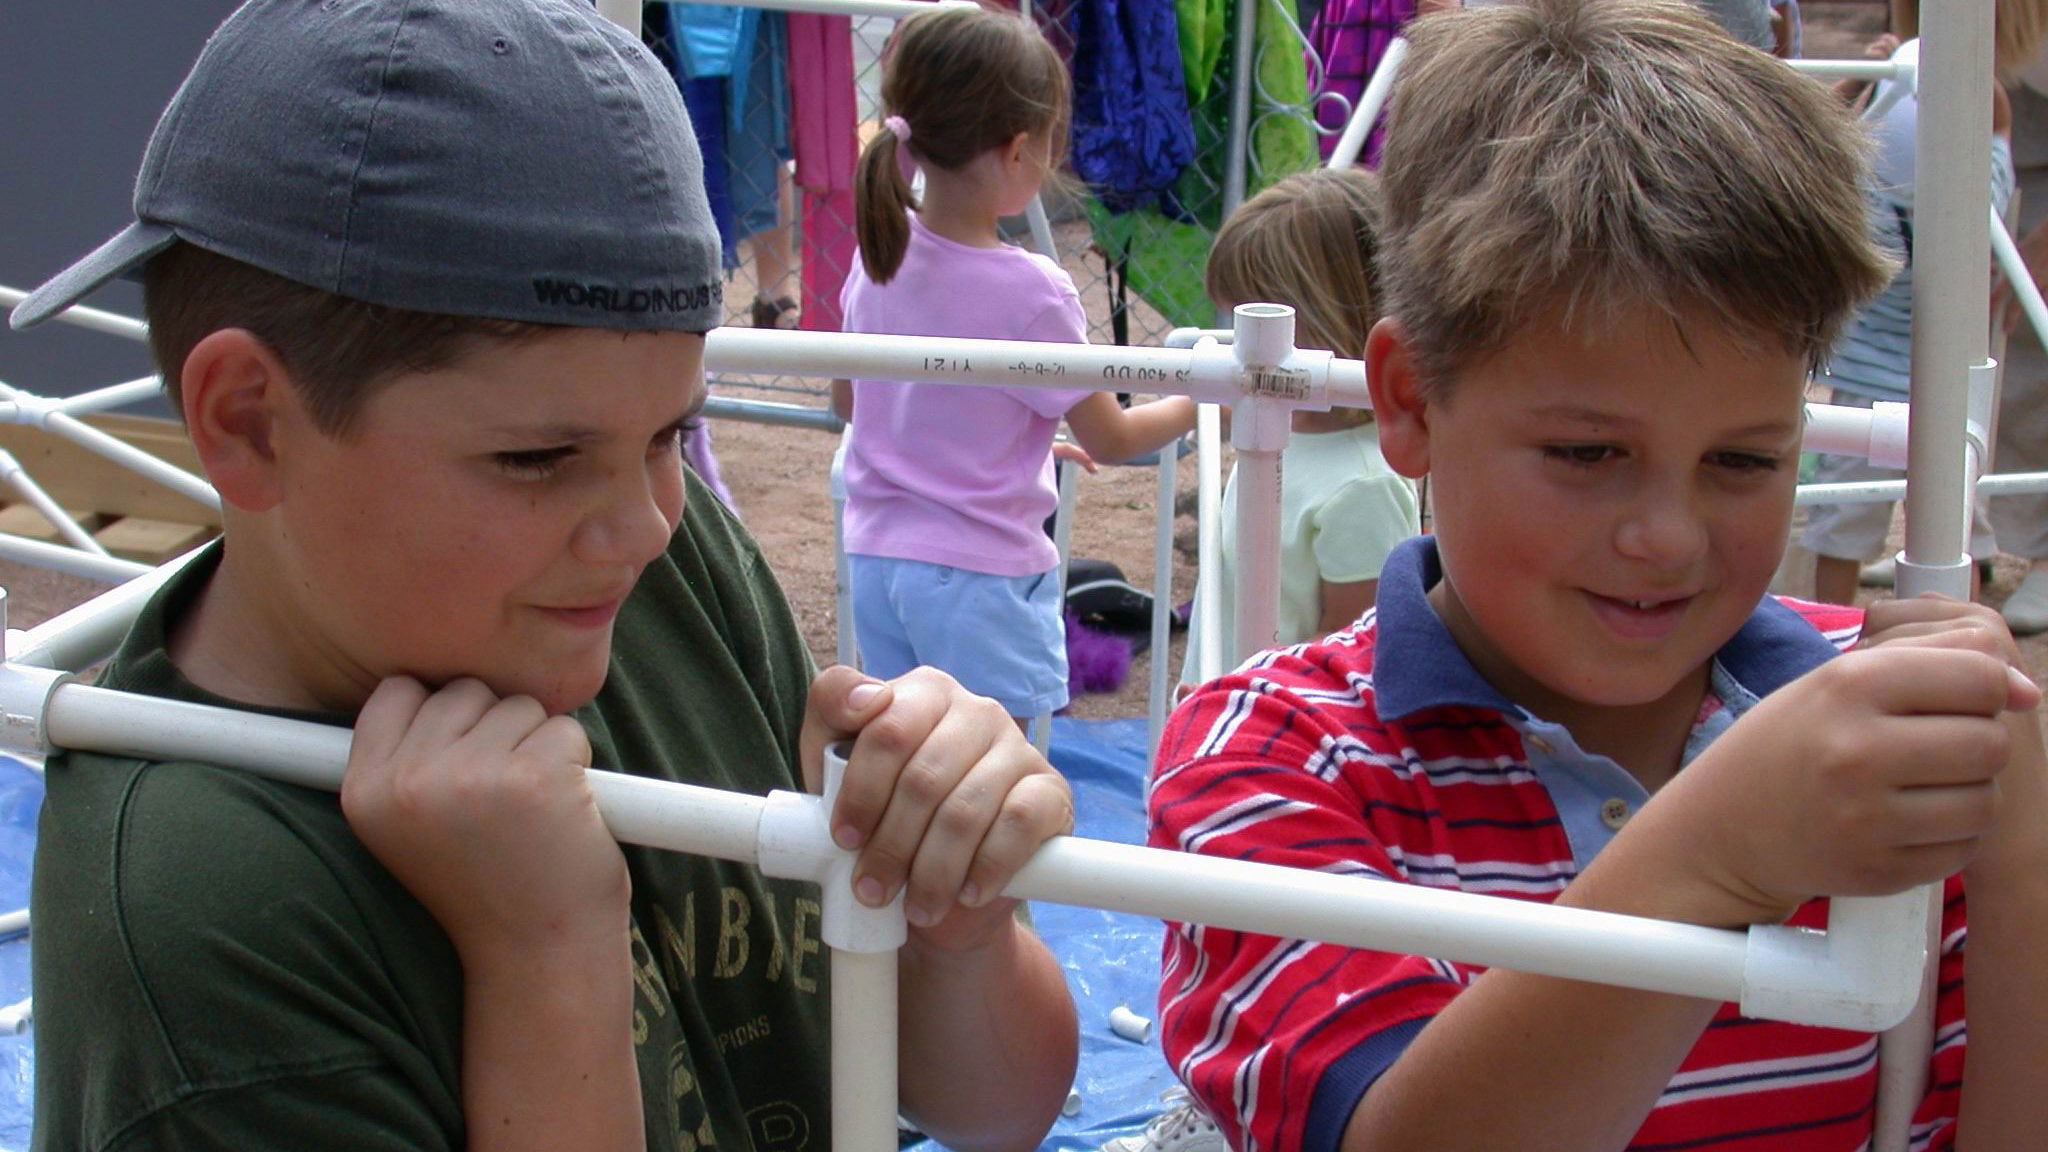 Two young kids working with PVC pipe.